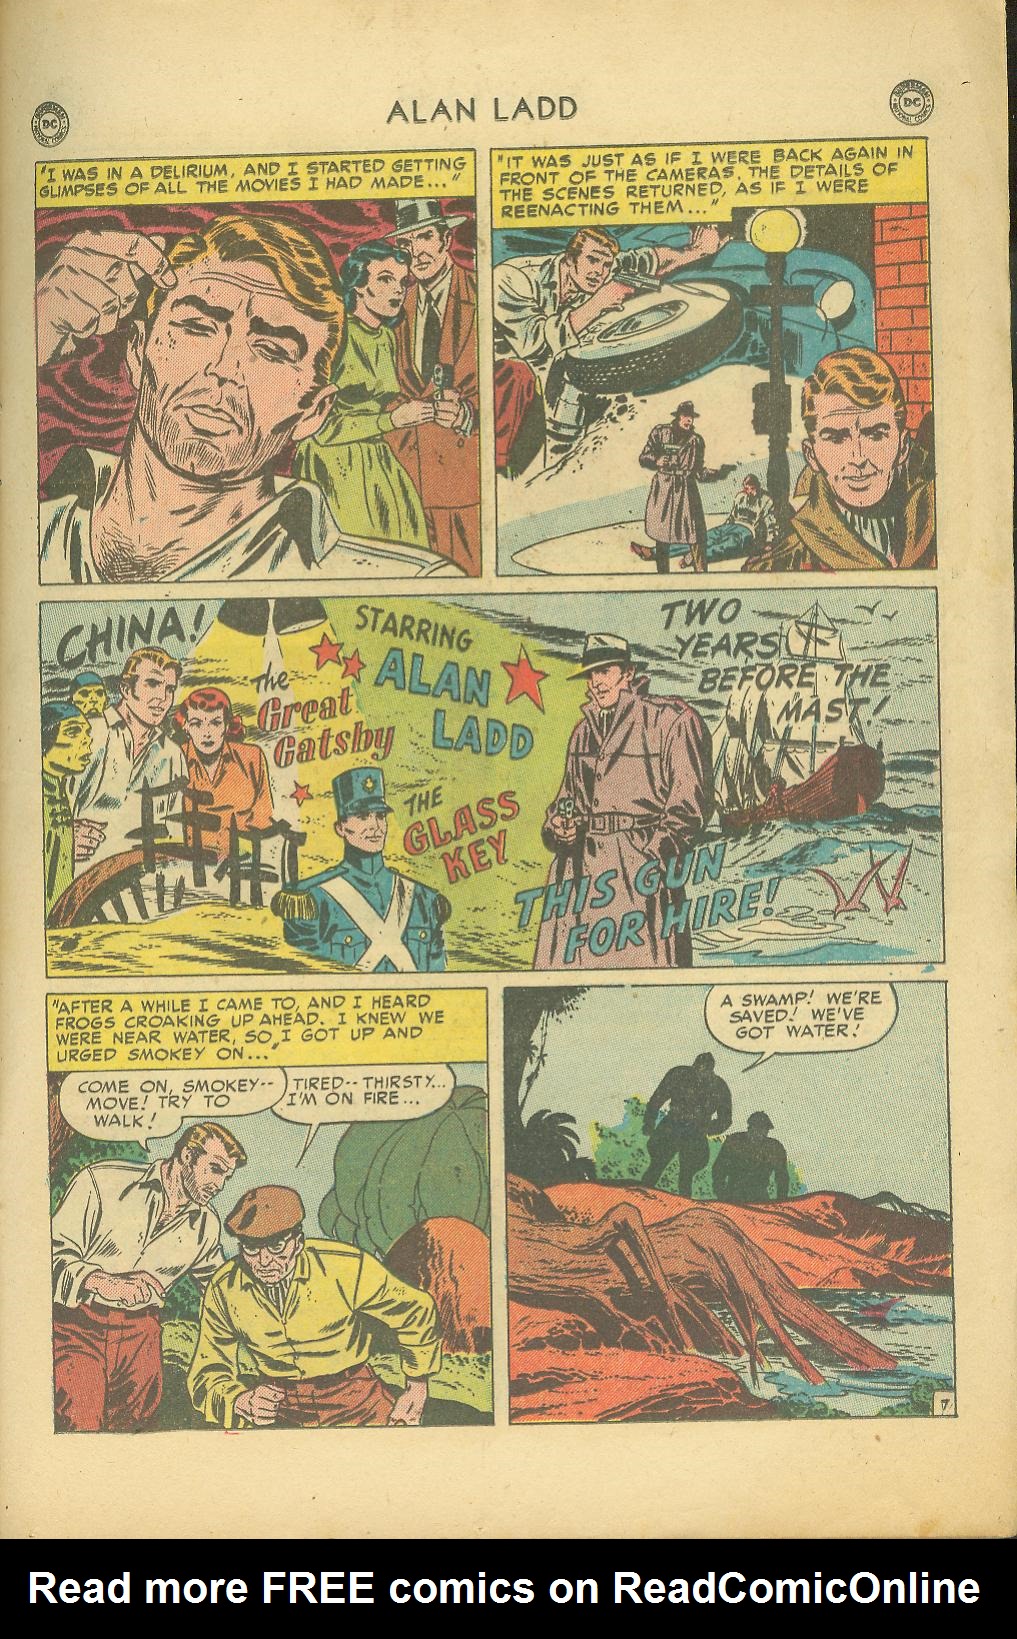 Read online Adventures of Alan Ladd comic -  Issue #7 - 21